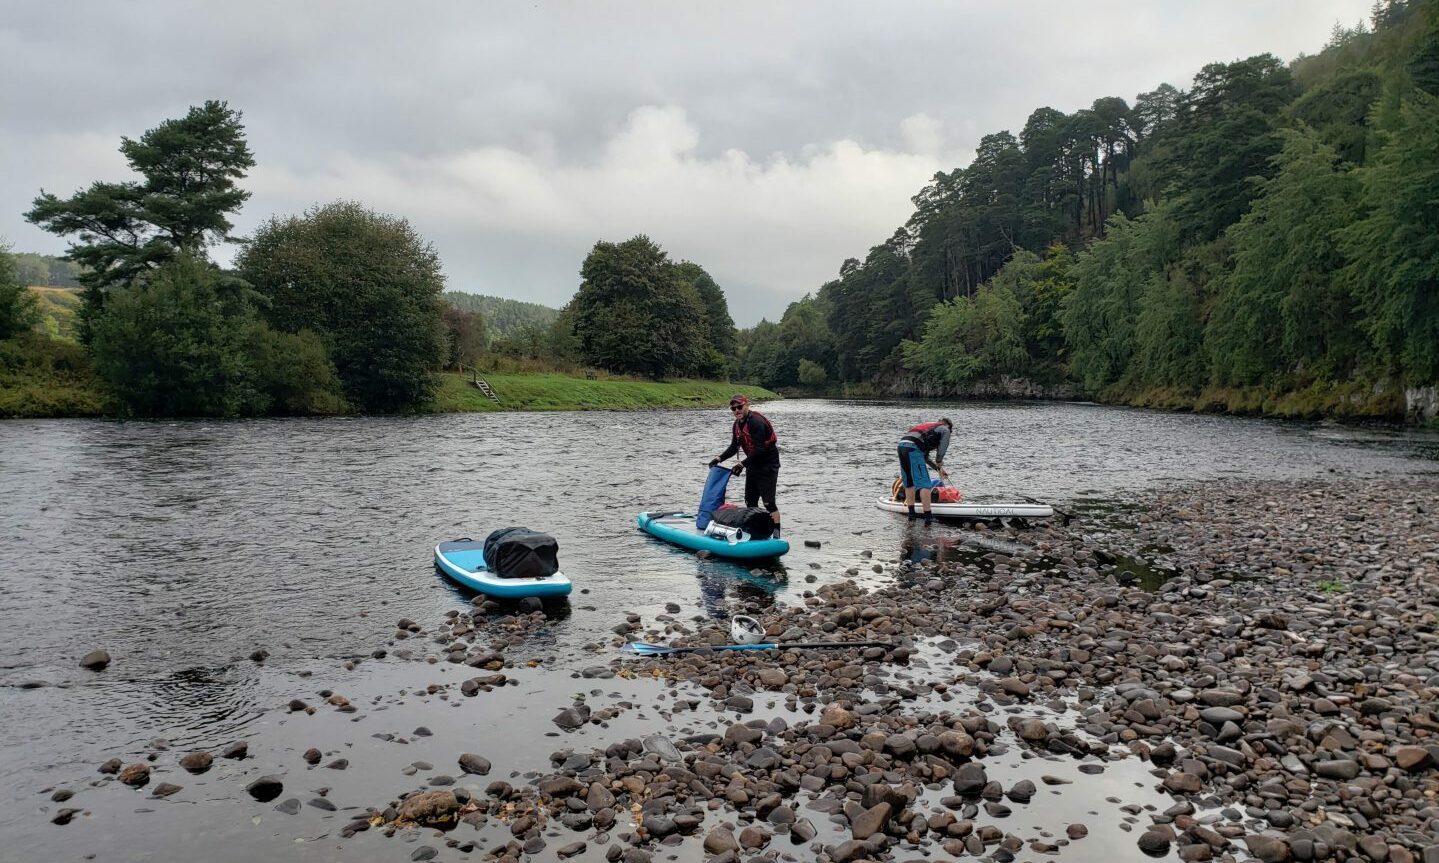 Paddleboarders getting ready to depart on rocks on banks of River Spey. 